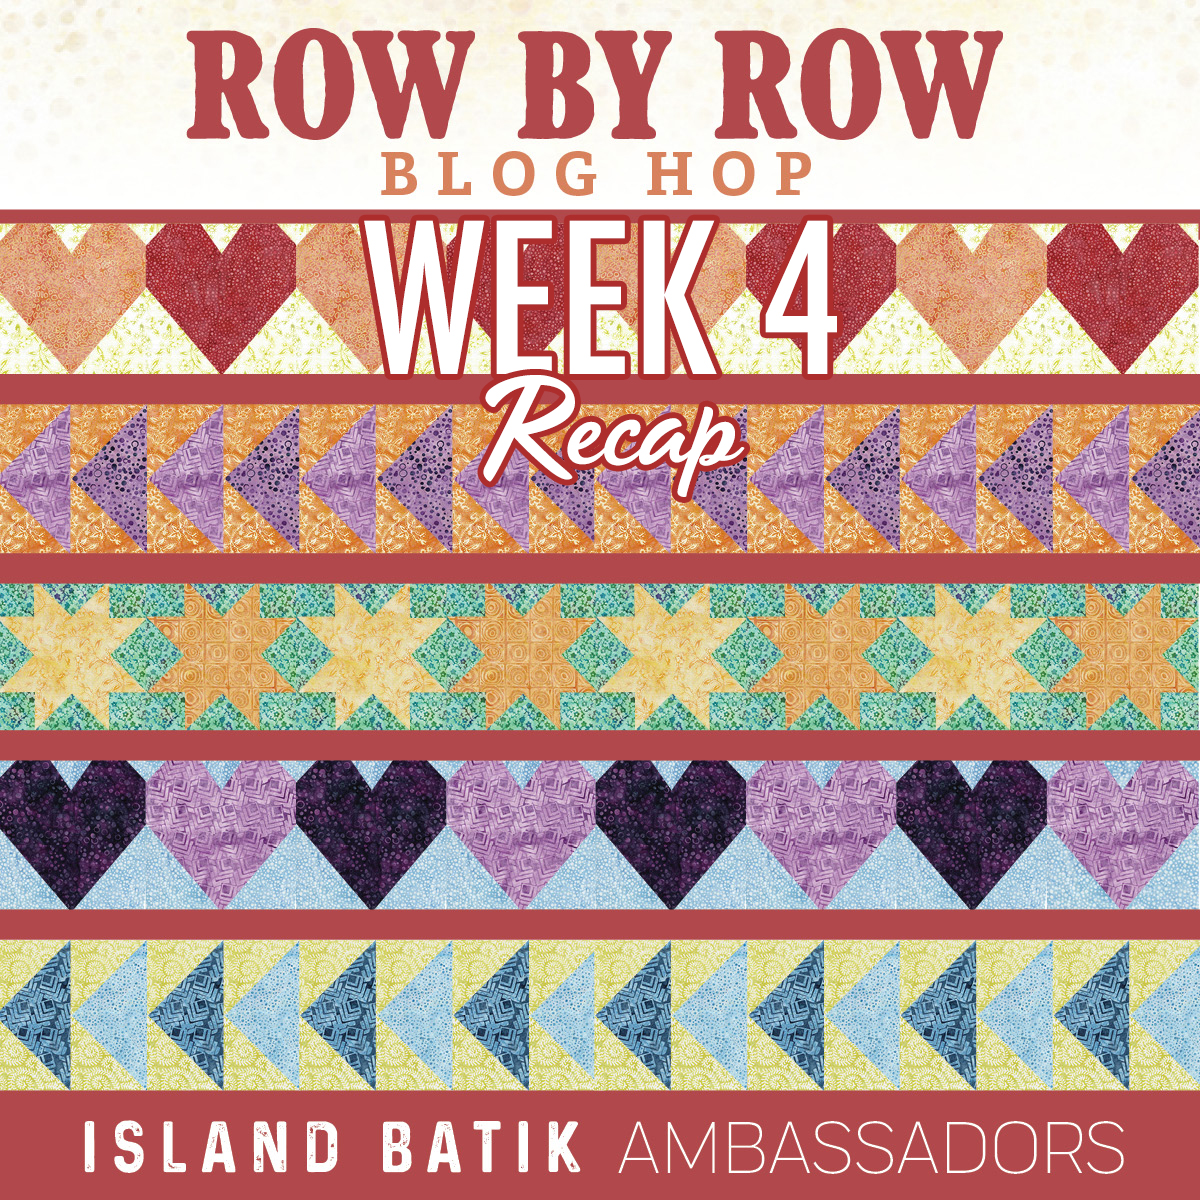 It's the last week in the Island Batik Row by Row blog hop.

THIS IS THE LAST DAY TO ENTER MY GIVEAWAY! Jump to my blog to enter and enter Island Batik's giveaway too!

inquiringquilter.com/questions/2022…

#inquiringquilter #islandbatikambassador @islandbatik #islandbatik #iloveislandbatik